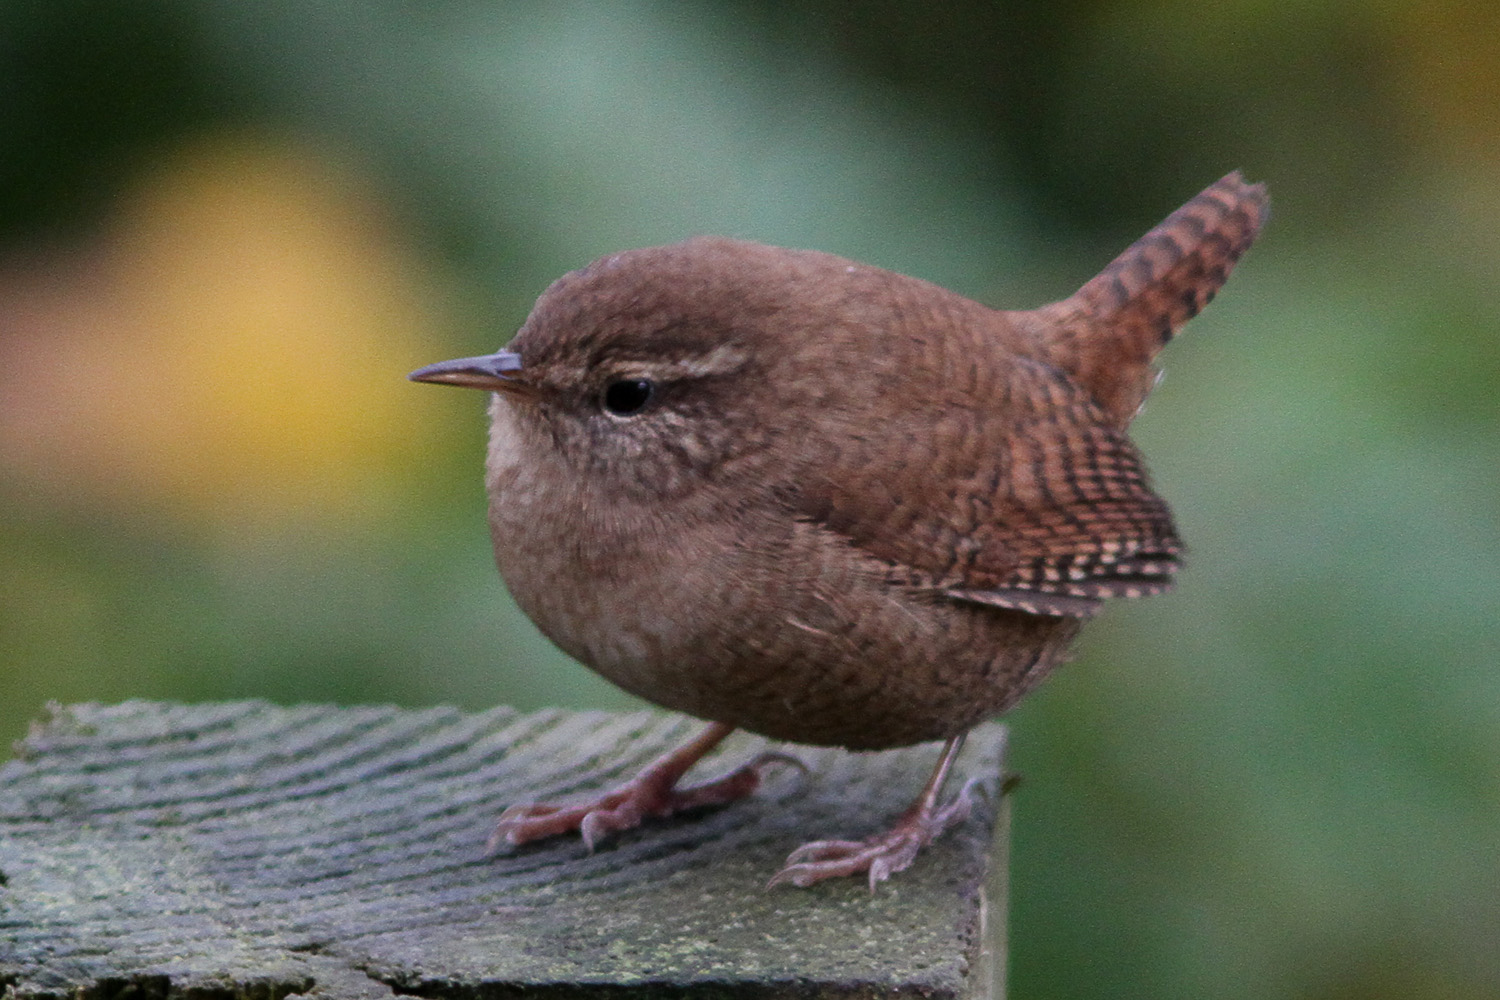 Weighing in at less than 12 g and 10 cm long, the wren (Troglodytes troglod...